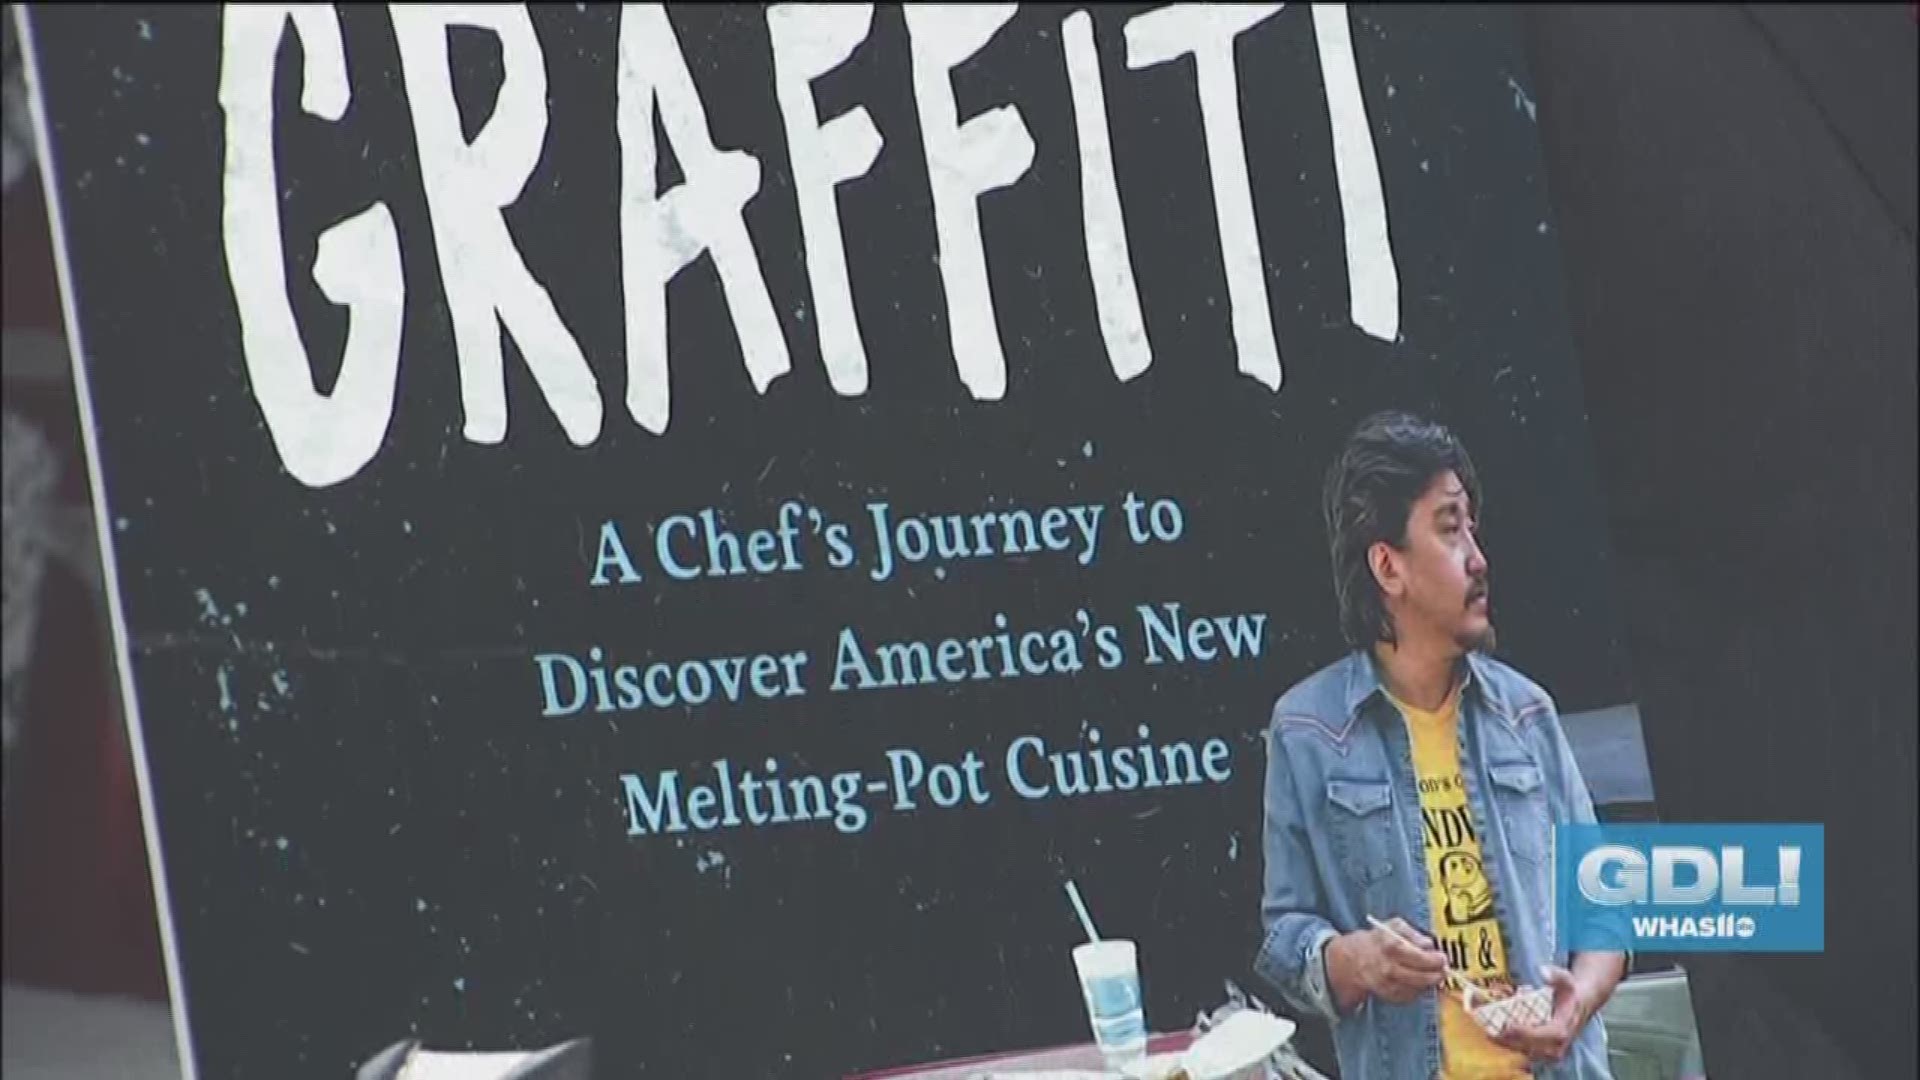 Chef Ed Lee spent two years traveling the country exploring American cuisine in both traditional and innovative forms. His new book "Buttermilk Graffiti" is a memoir of his travels and the characters he met.